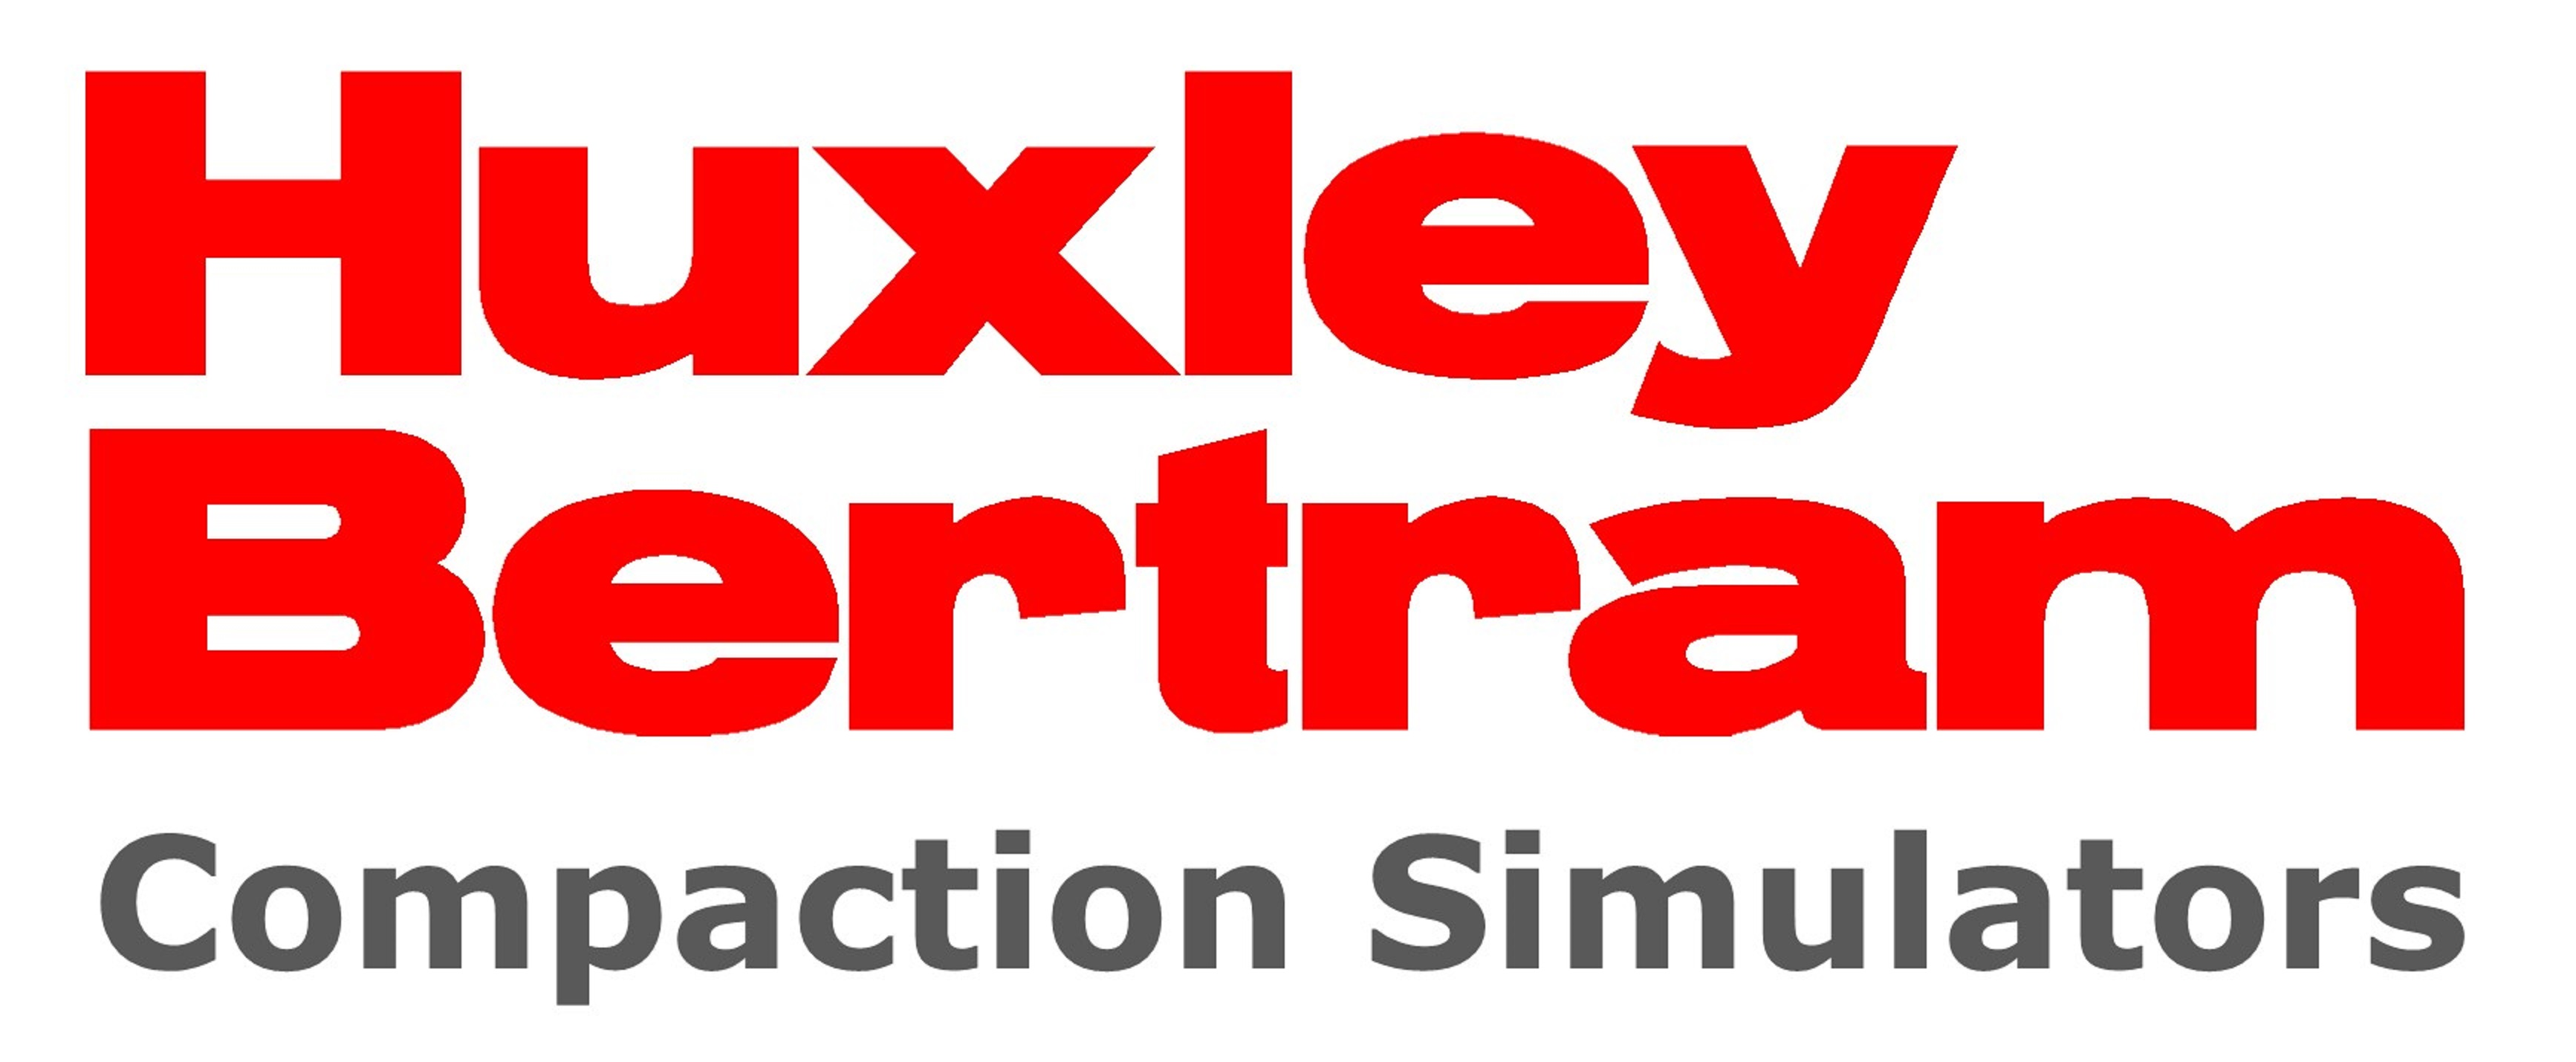 Huxley Bertram Customer Services and Support